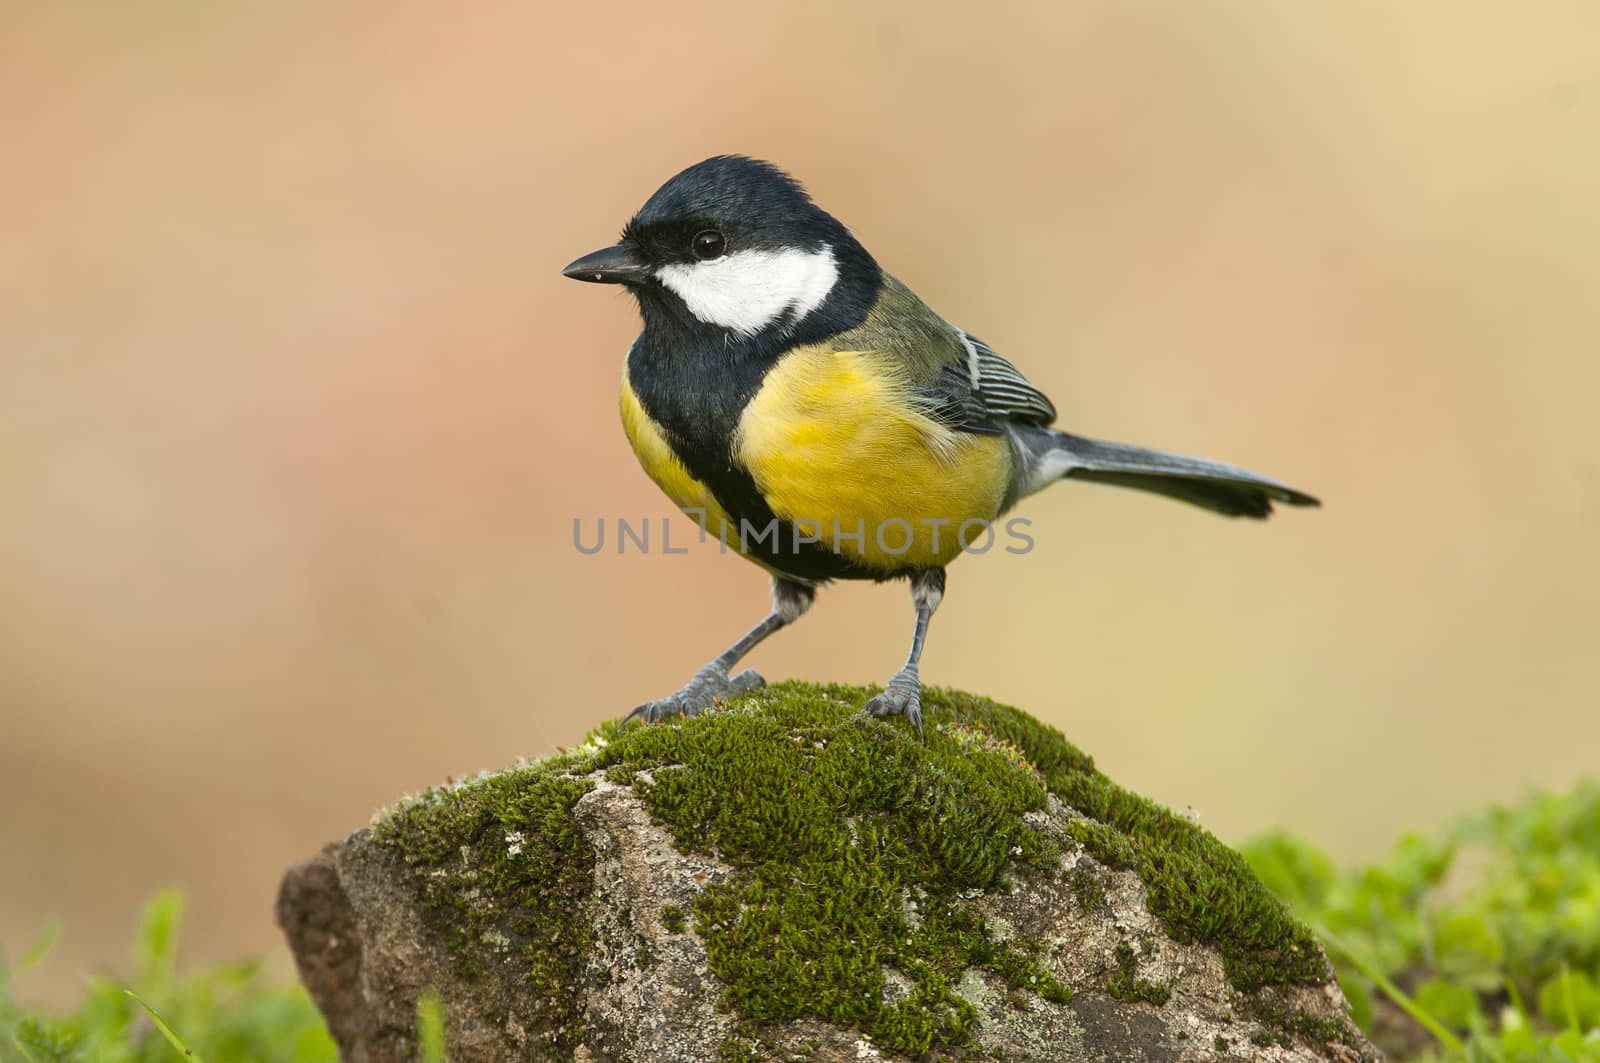 Great tit (Parus major). Garden bird, perched on a stone with mo by jalonsohu@gmail.com